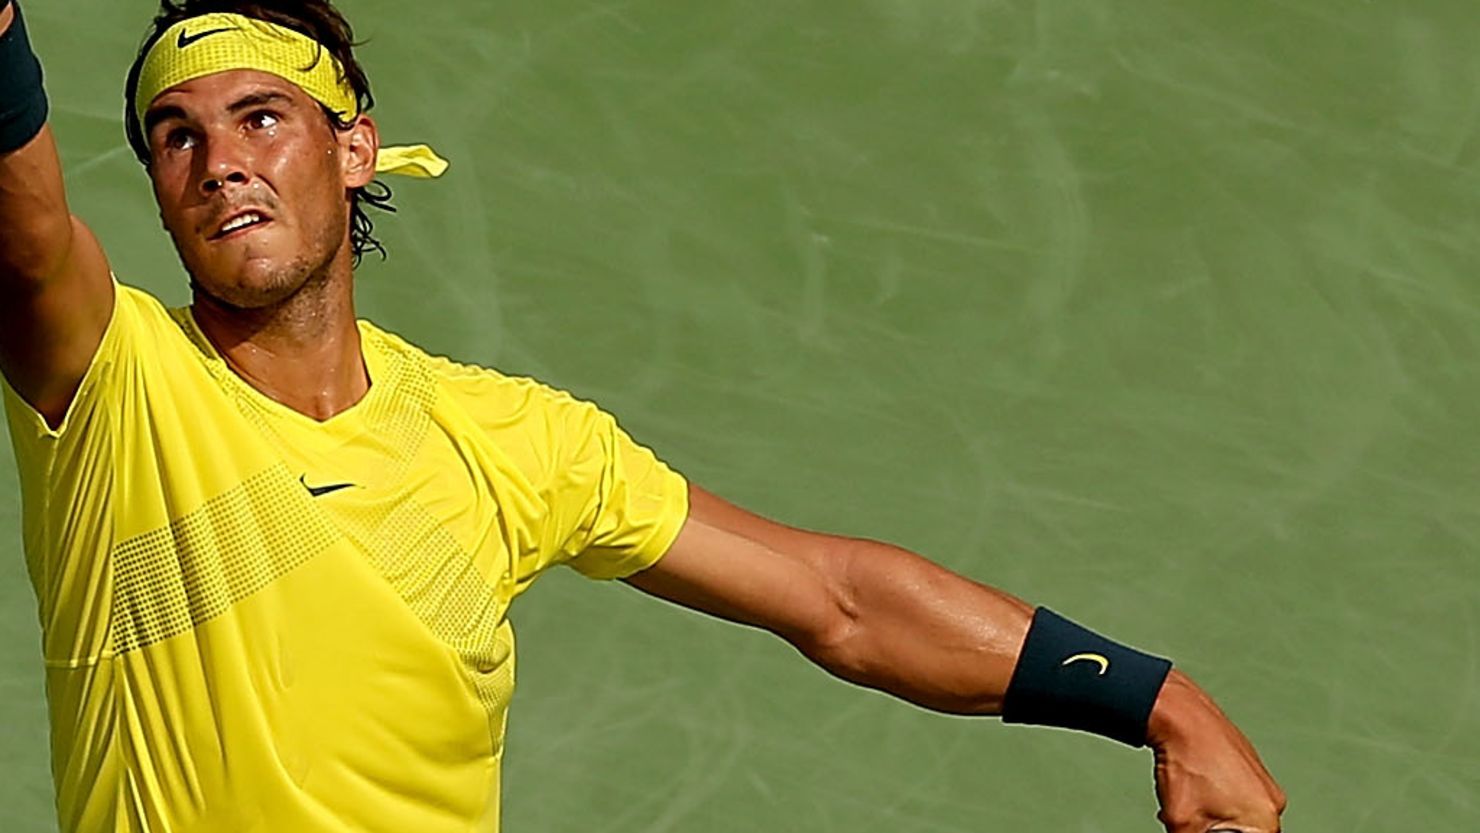 Former world No. 1 Rafael Nadal was playing for the first time since losing in the first round at Wimbledon.